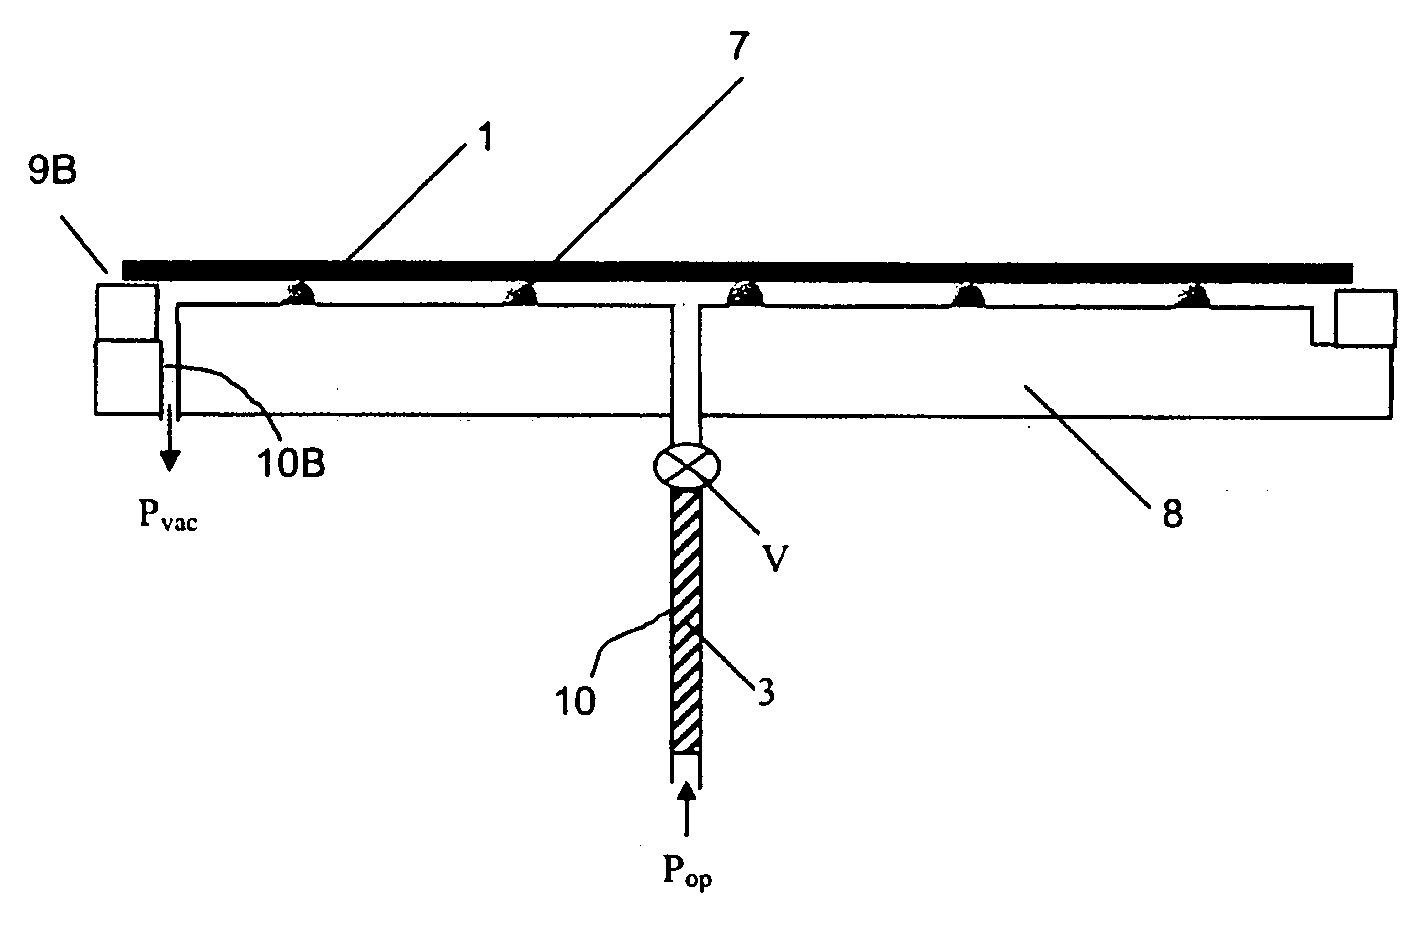 Lithography system, method of clamping and wafer table